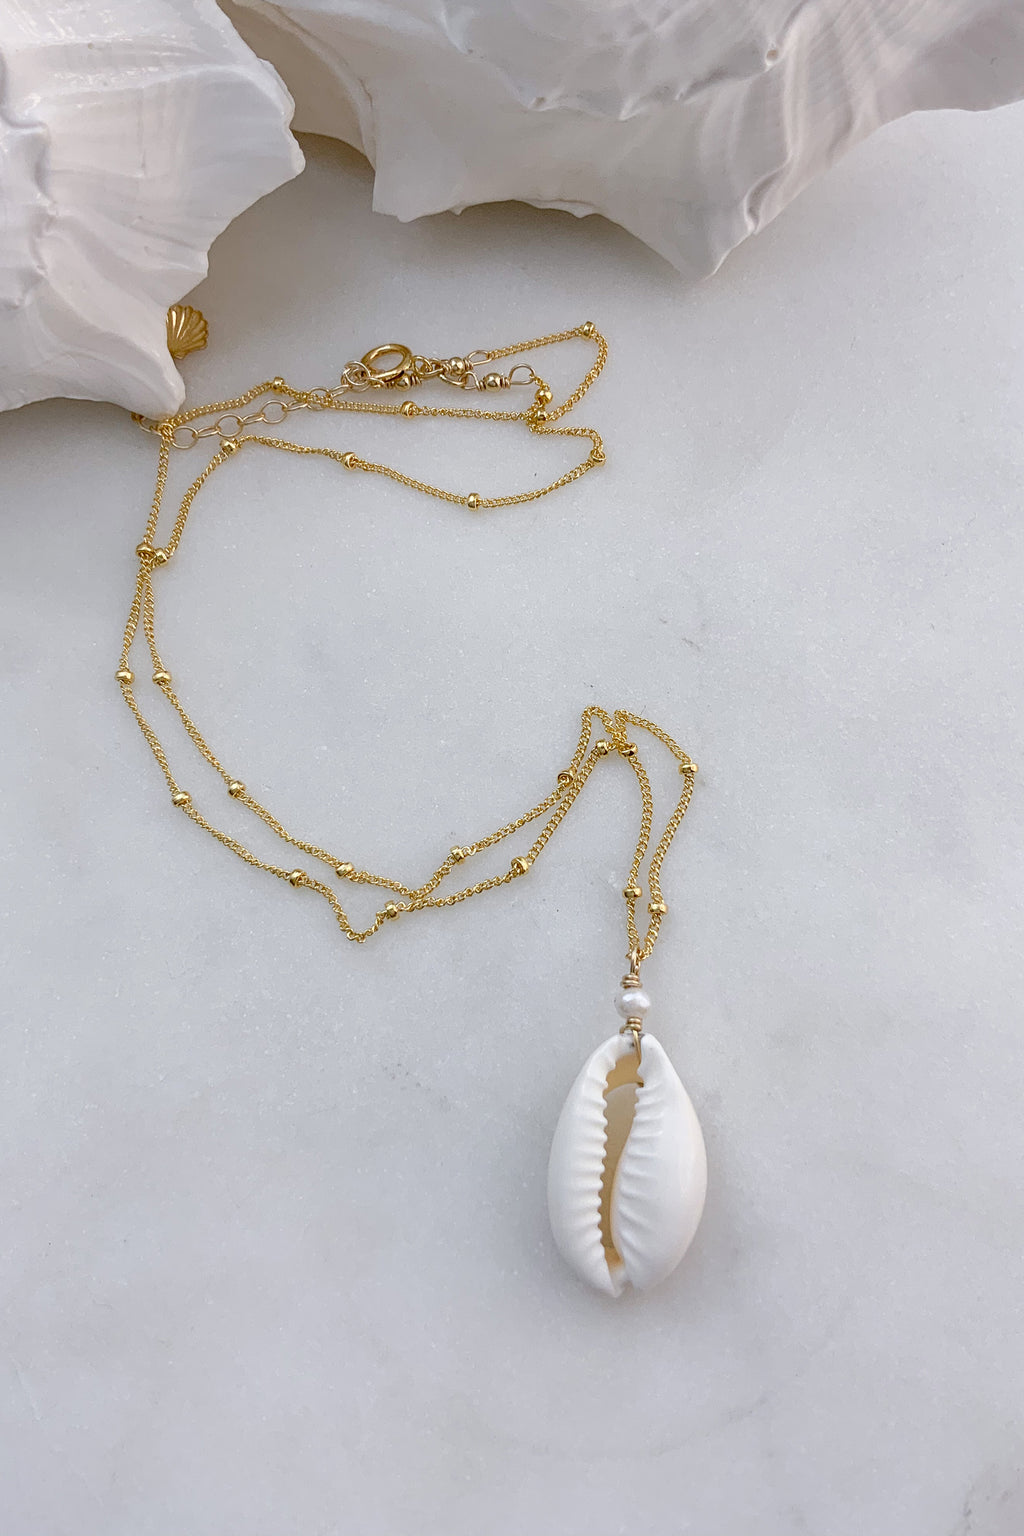 Cowrie Pearl Satellite Necklace - Gold Fill